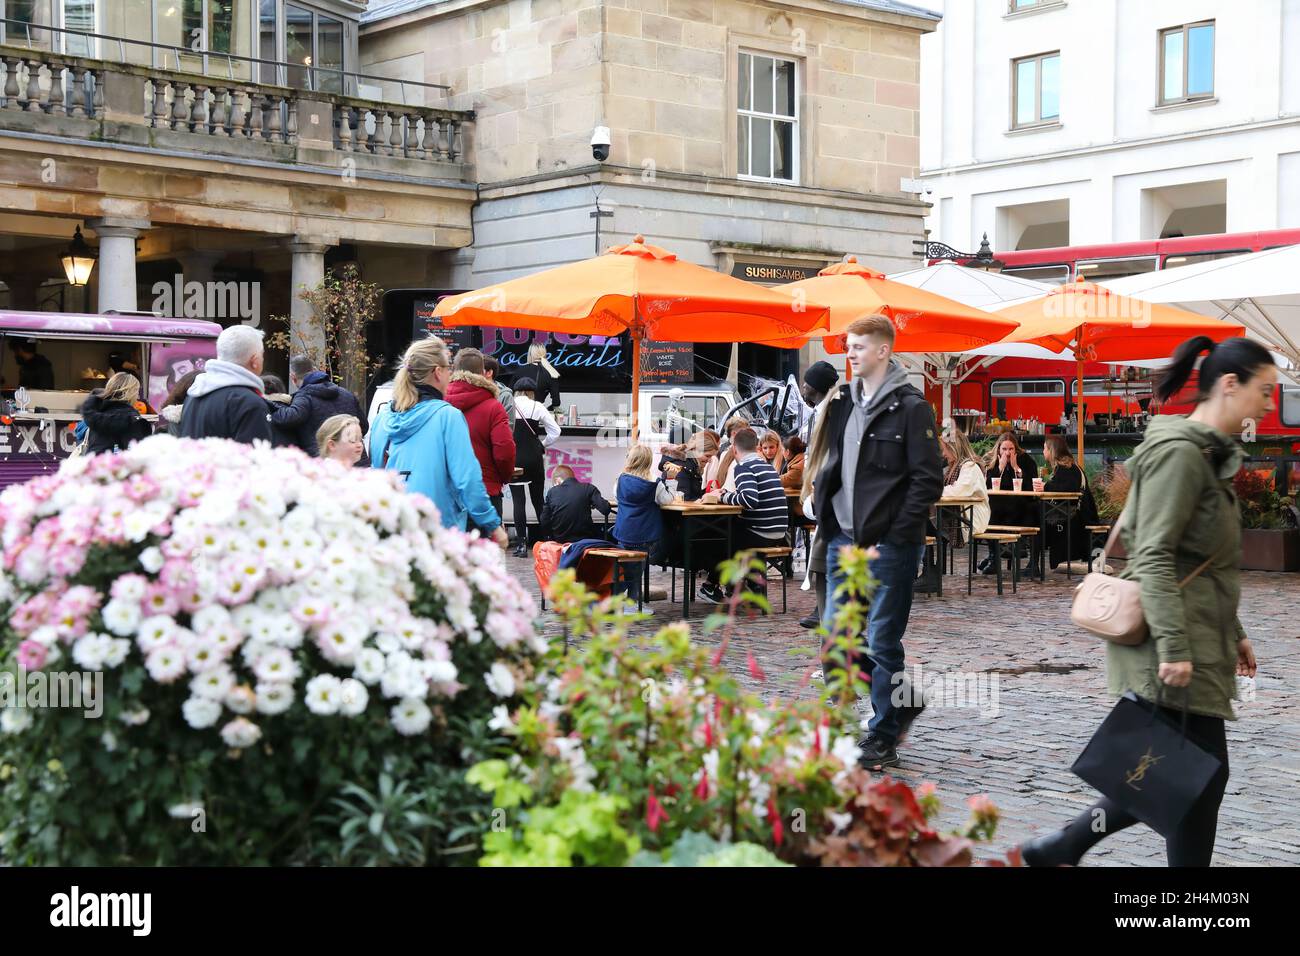 People relaxing in Covent Garden, by autumn flower displays, in London, UK Stock Photo